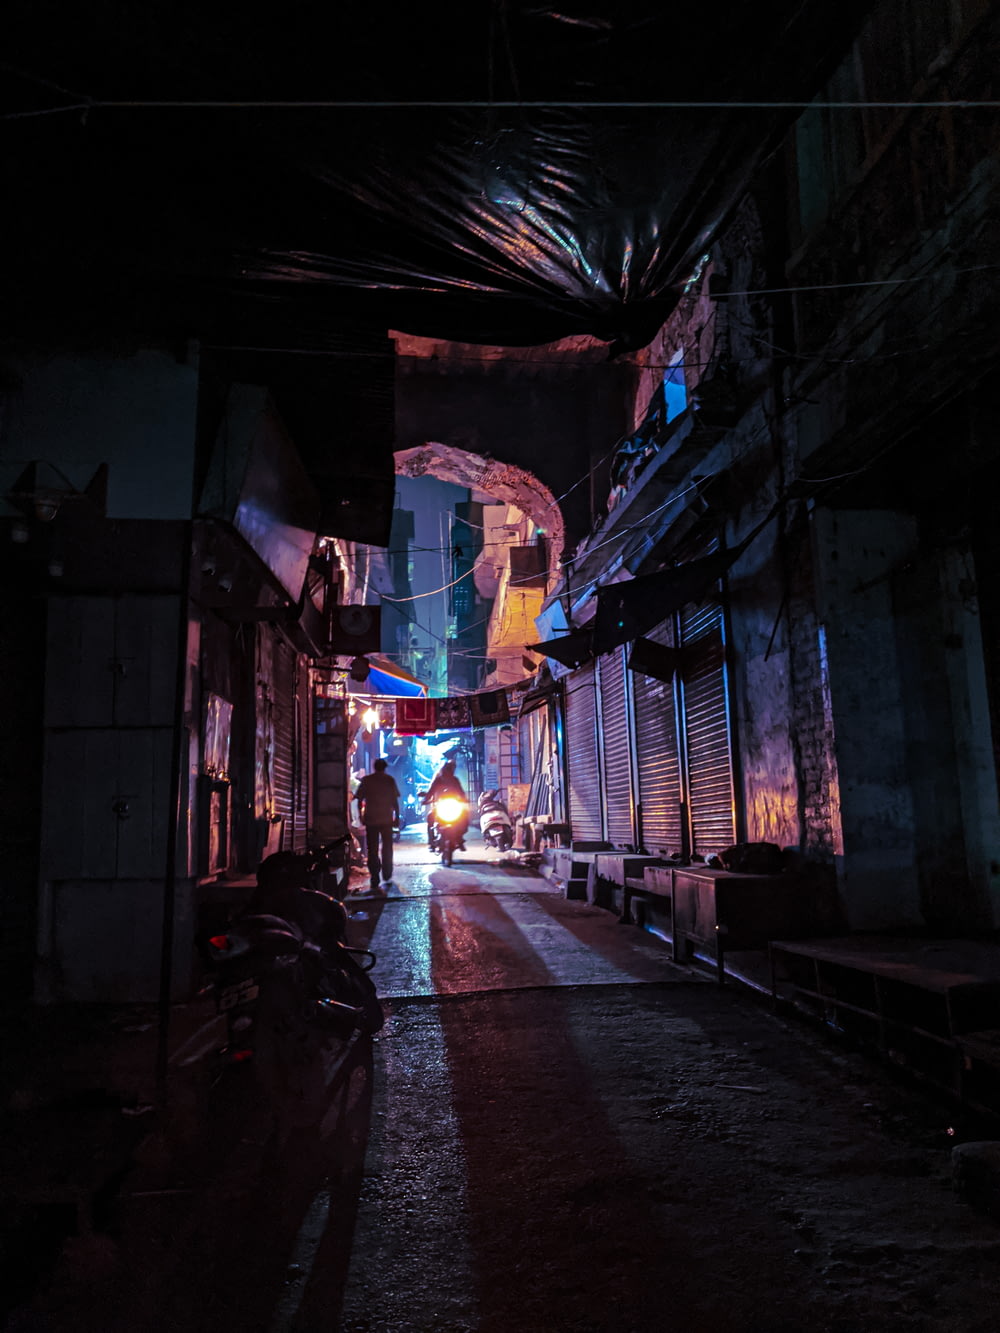 a dark alley with a person walking down it